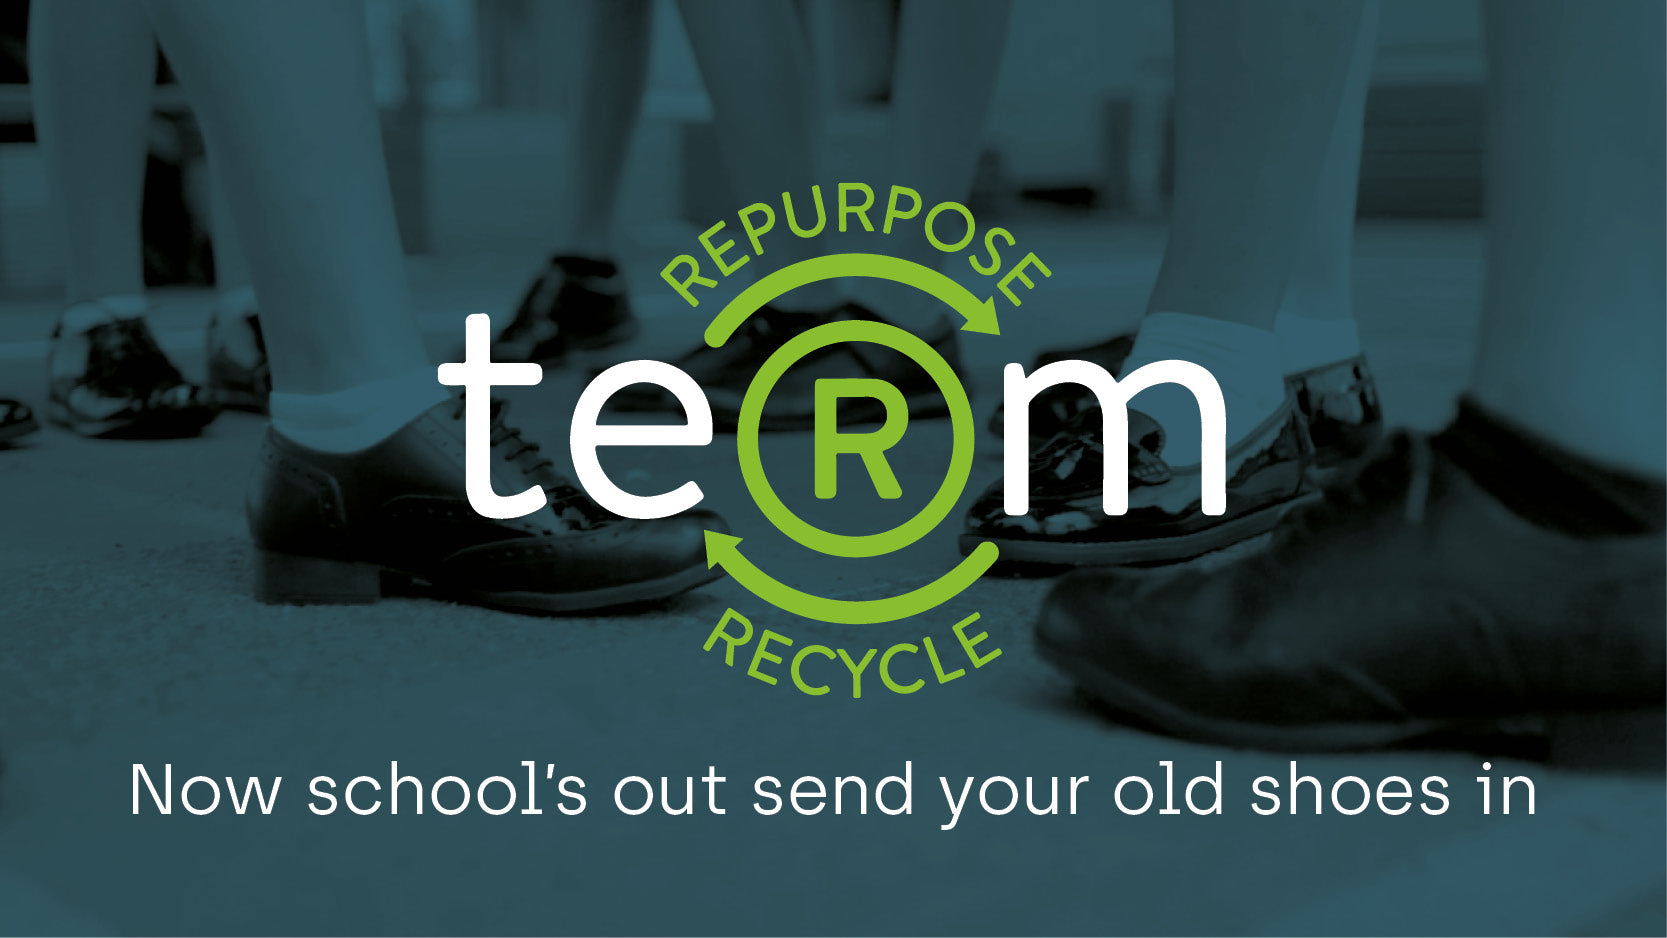 Donate your old school shoes to those in need. Bring new lease in life to your old shoes